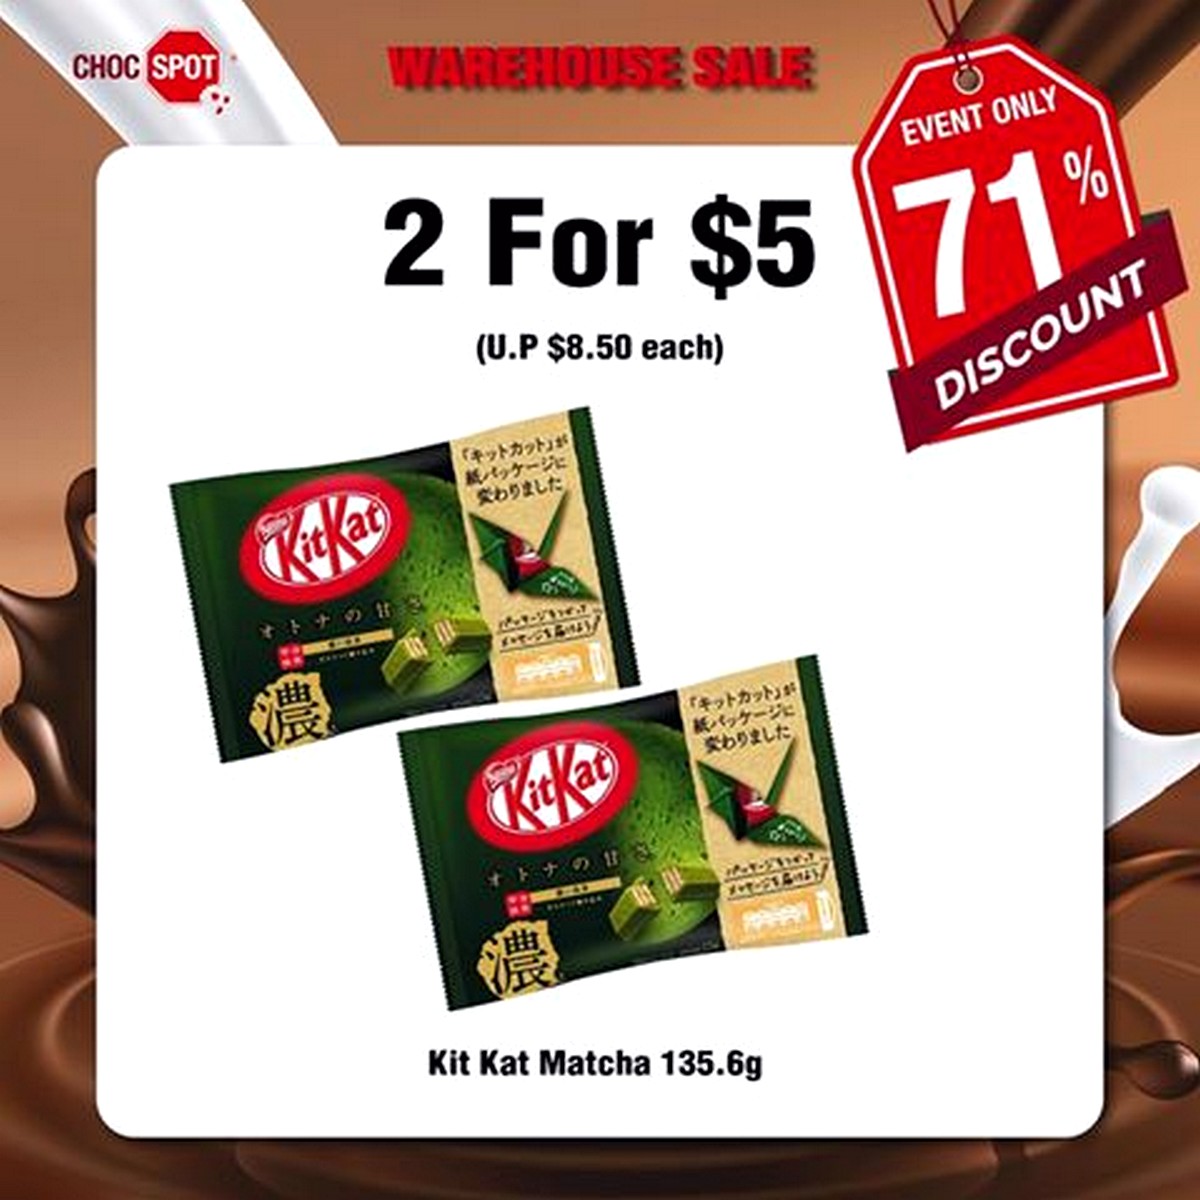 Choc-Spot-Warehouse-Sale-Highlights-005 24 Jul-2 Aug 2020: Choc Spot Warehouse Sale! Up to 80% off Chocolates, Sweets, Chips, Biscuits!